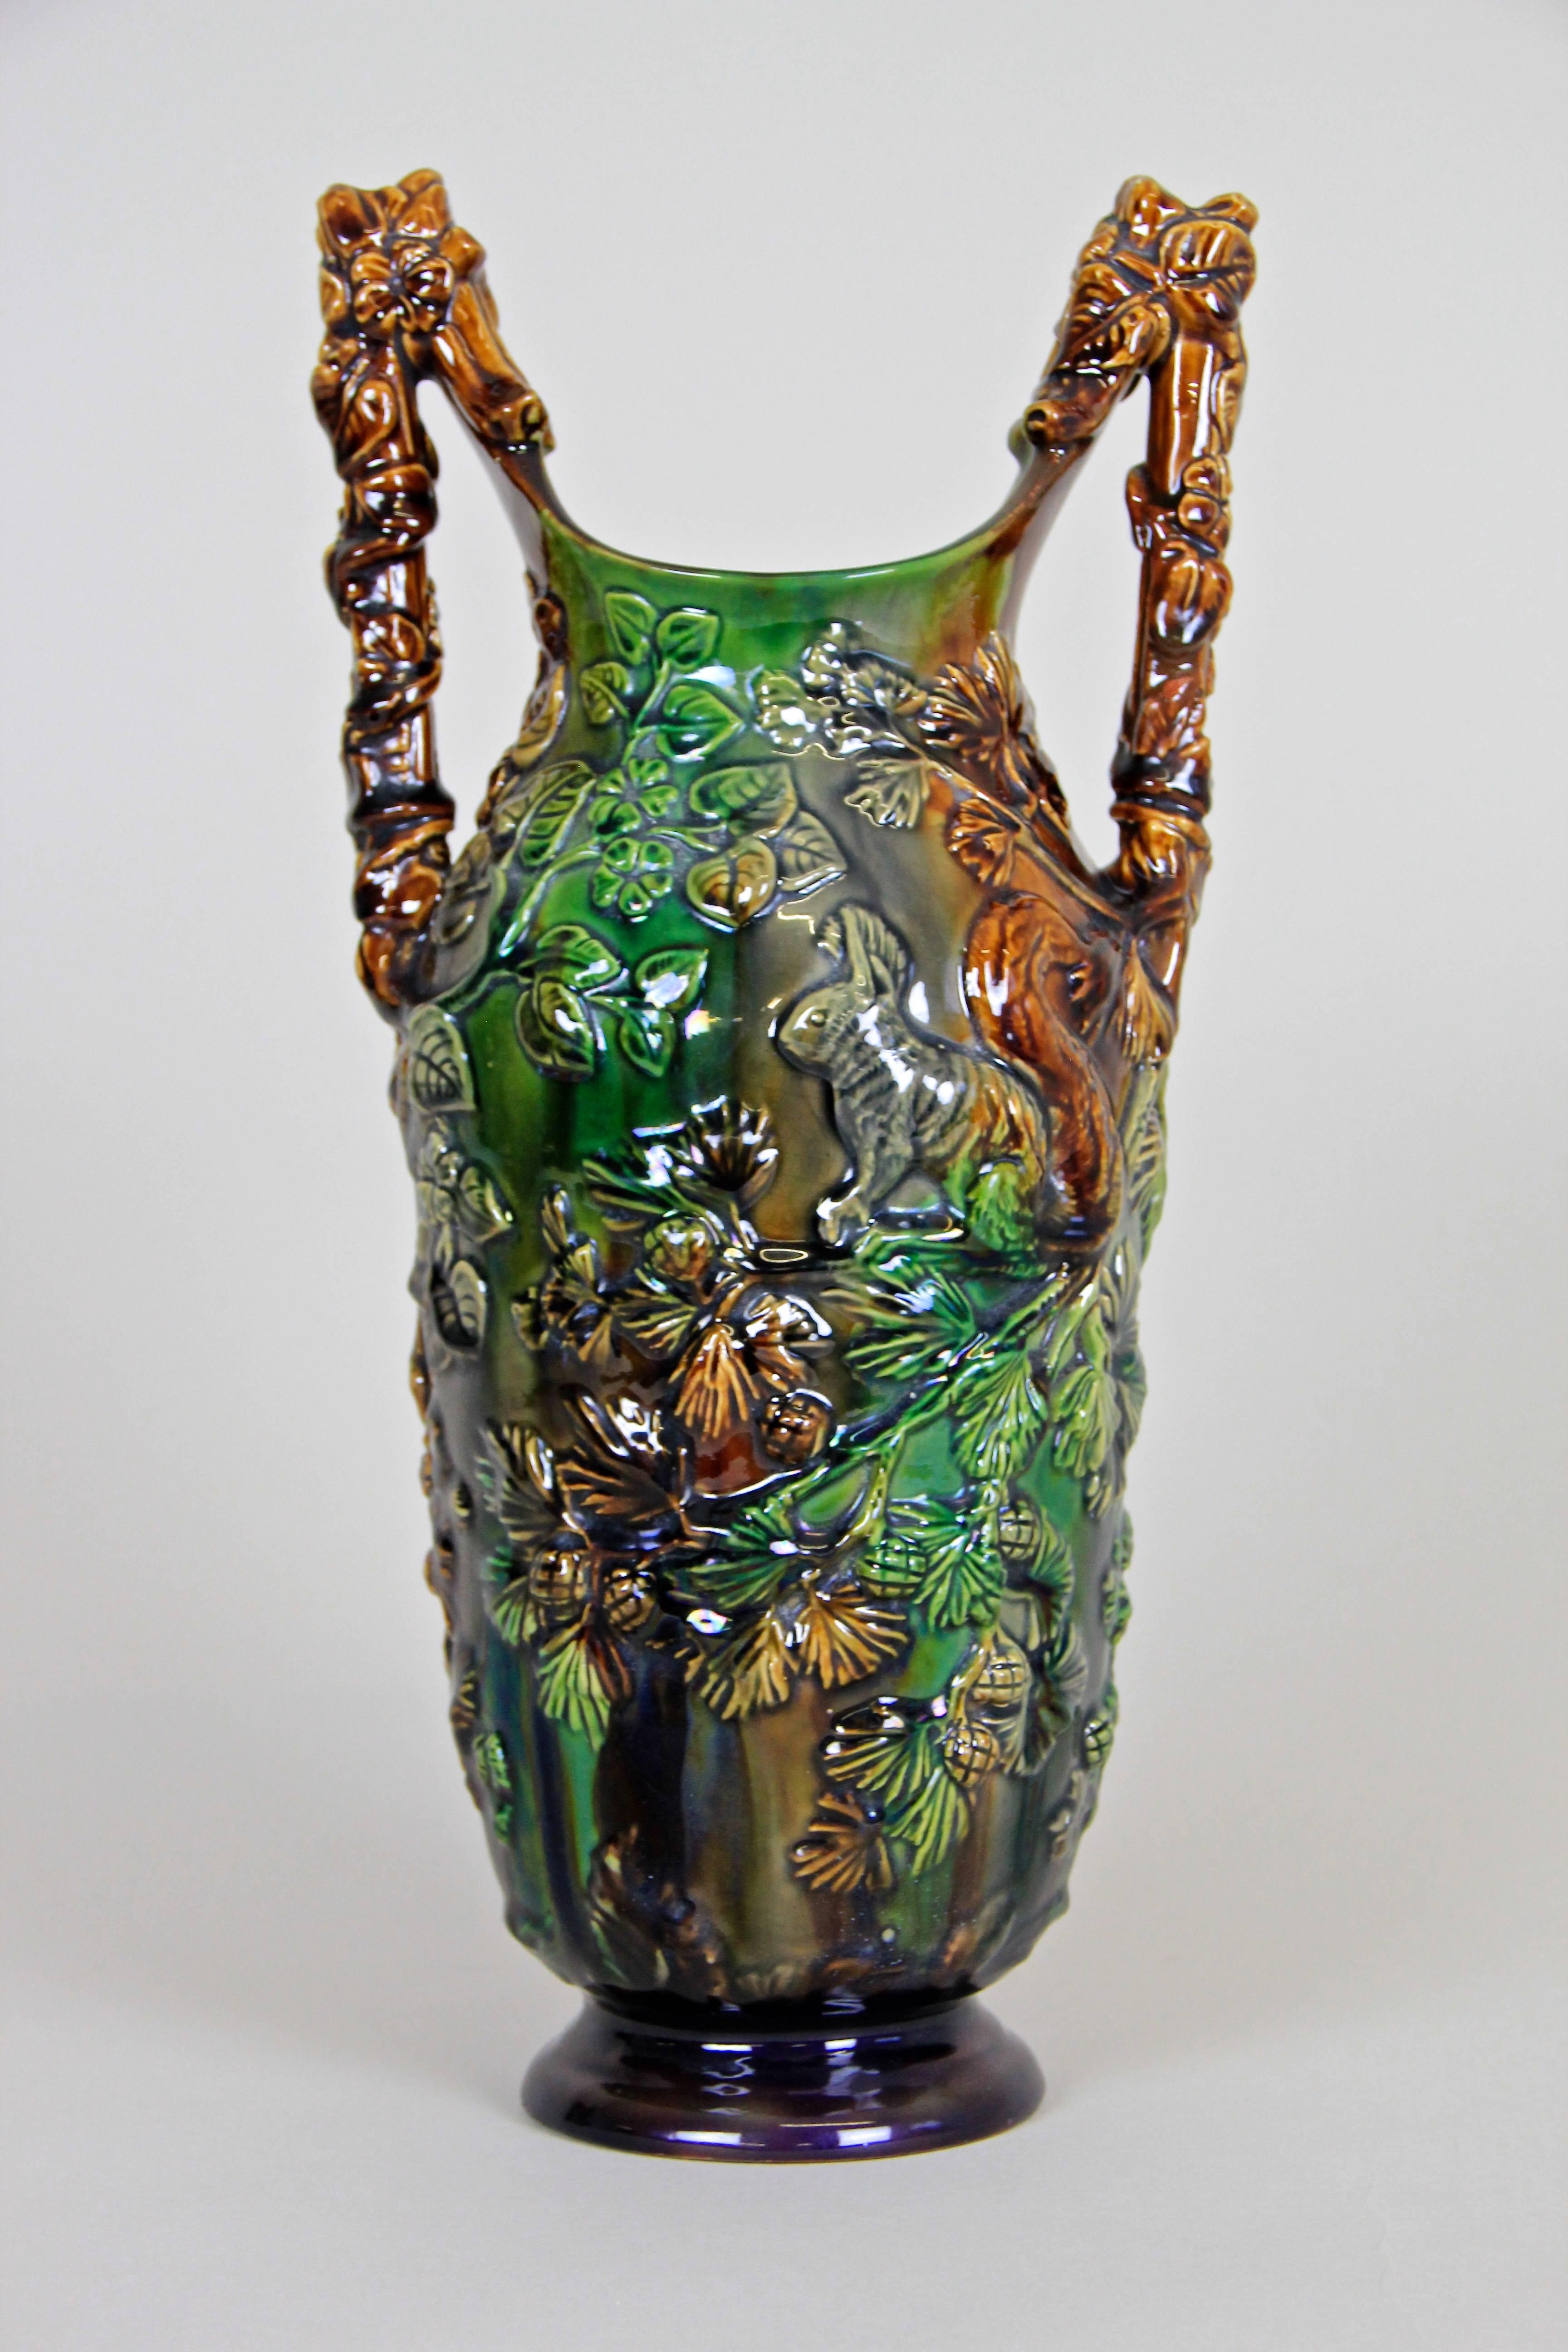 Unique Majolica vase from the famous workshops of Eichwald/ Bohemia circa 1900. This unusual shaped majolica vase impresses with an absolute extravagant embossed forest design showing different kind of tree branches, tendrils and three squirrels.